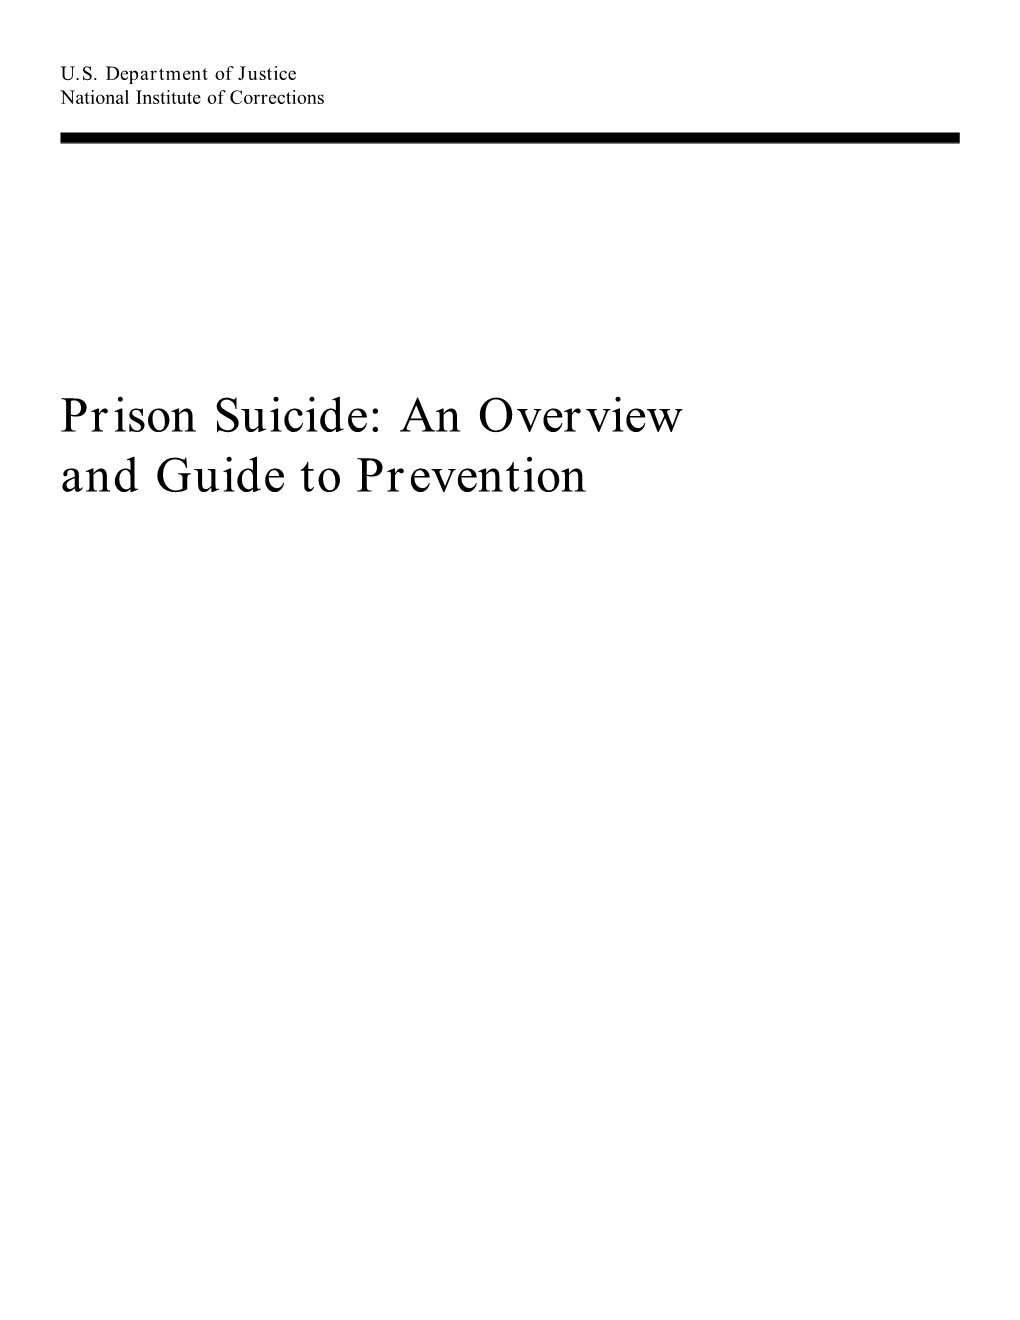 Prison Suicide: an Overview and Guide to Prevention National Institute of Corrections